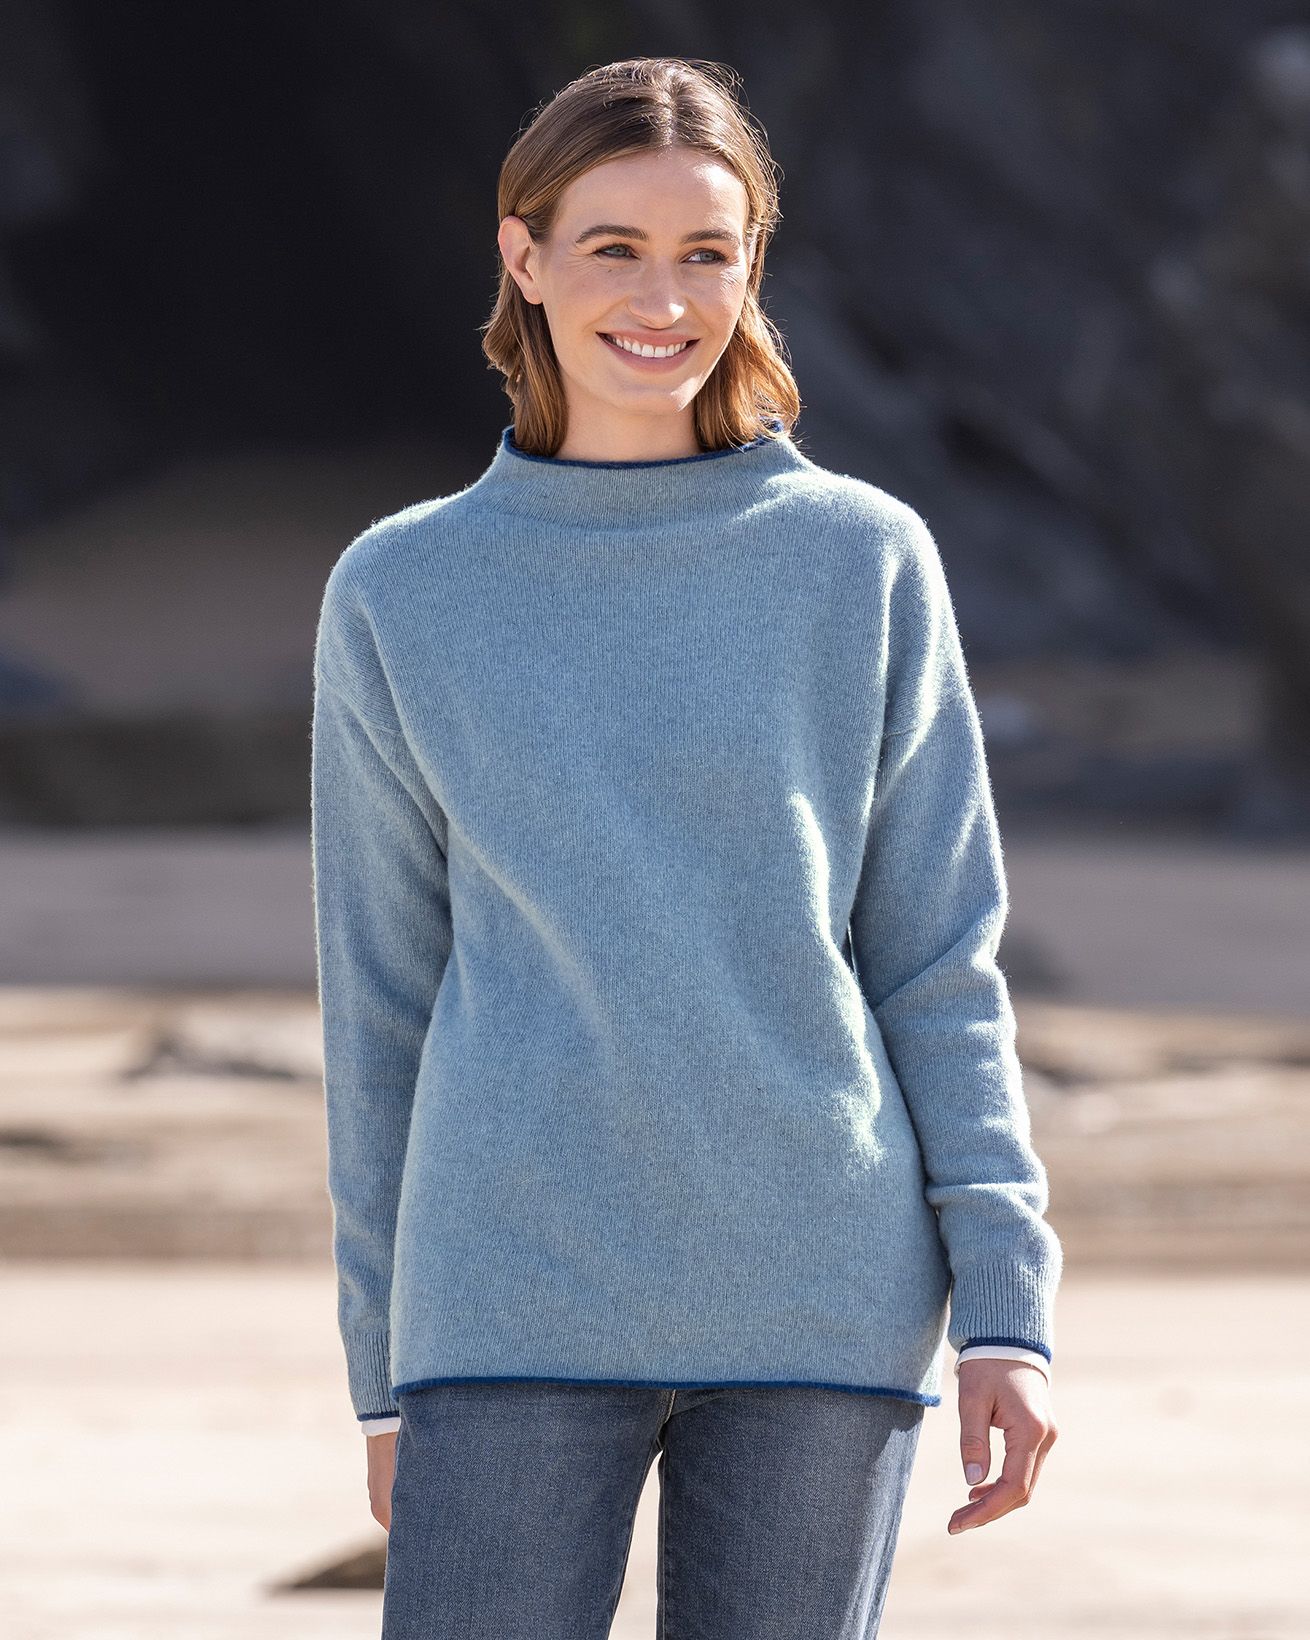 Colourful Knitted Jumpers & Sweaters for Women - Cara & The Sky